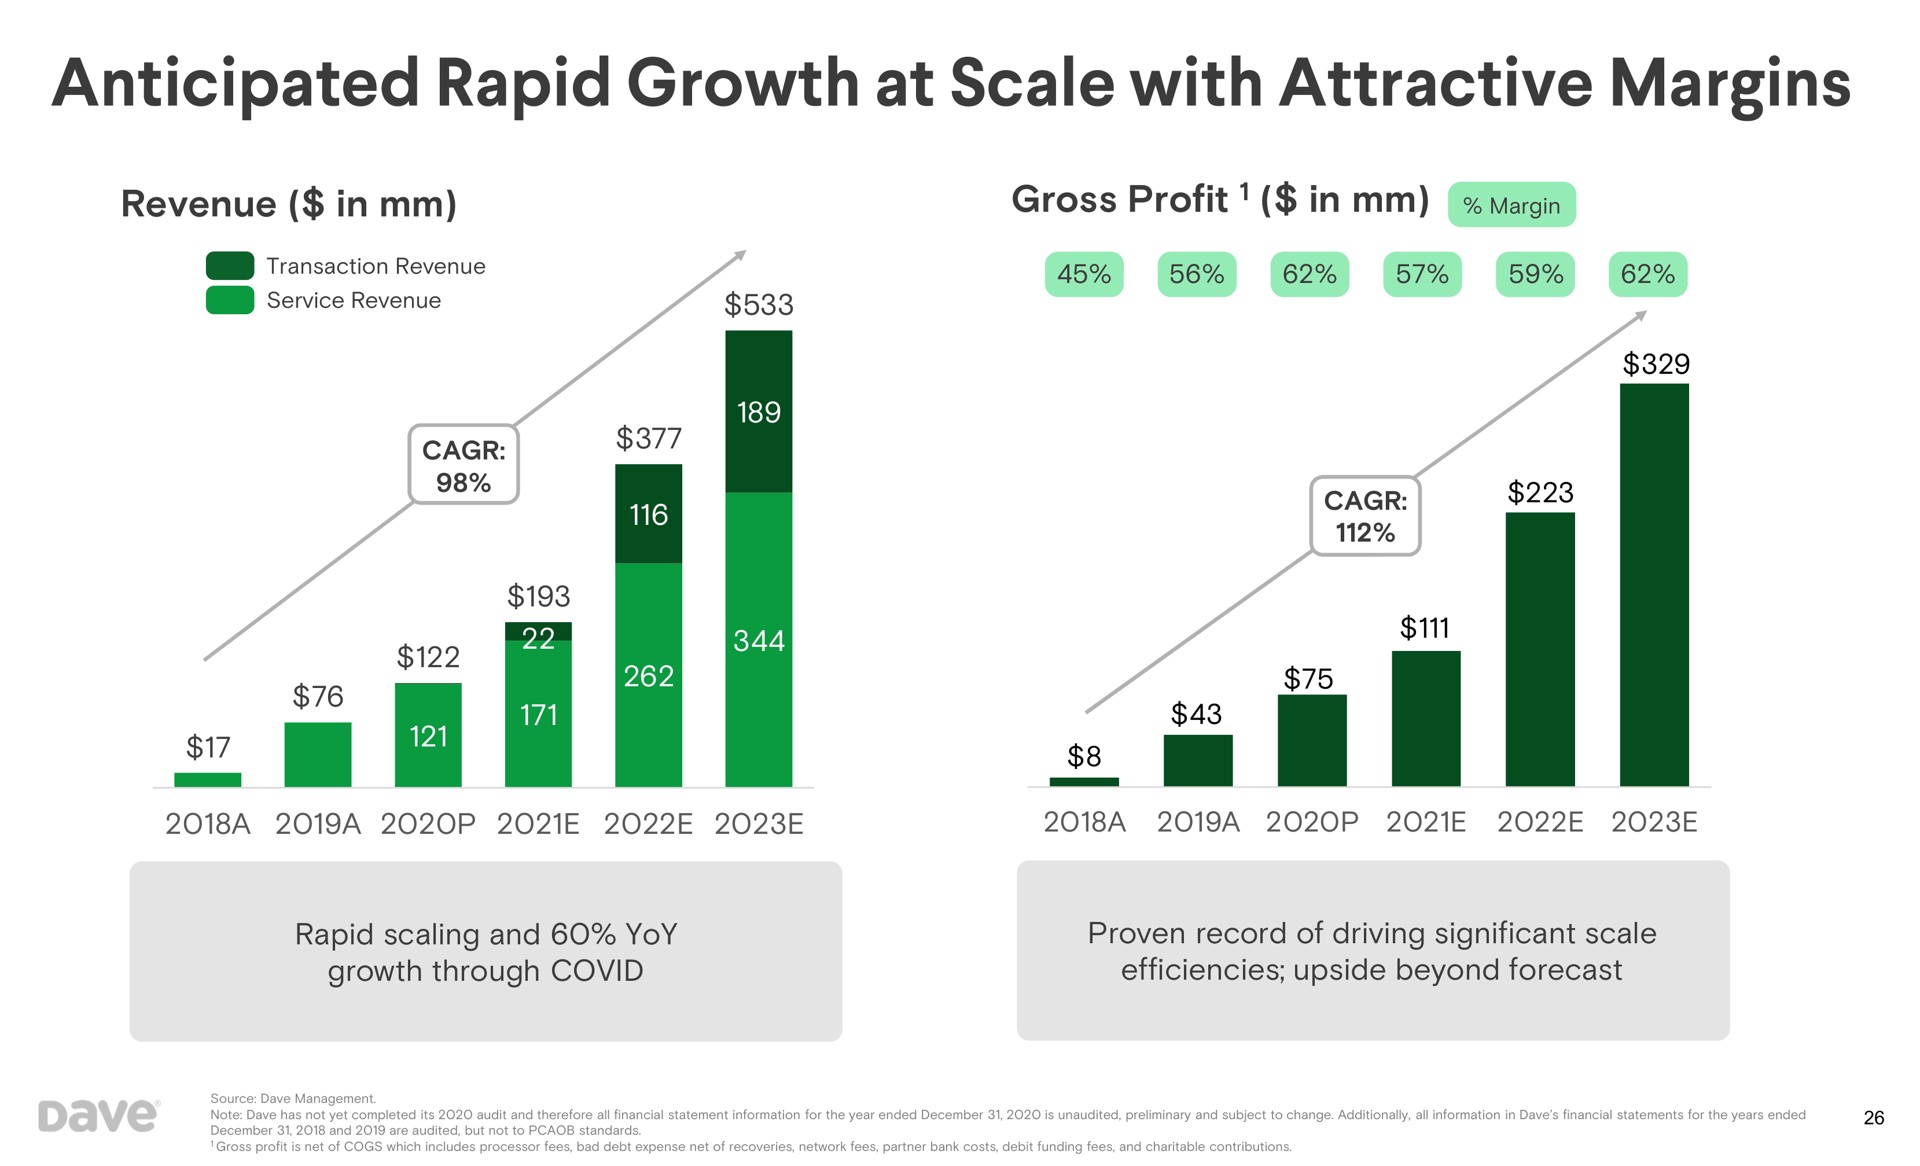 revenue in gross profit in anticipated rapid growth at scale with attractive margins | Dave